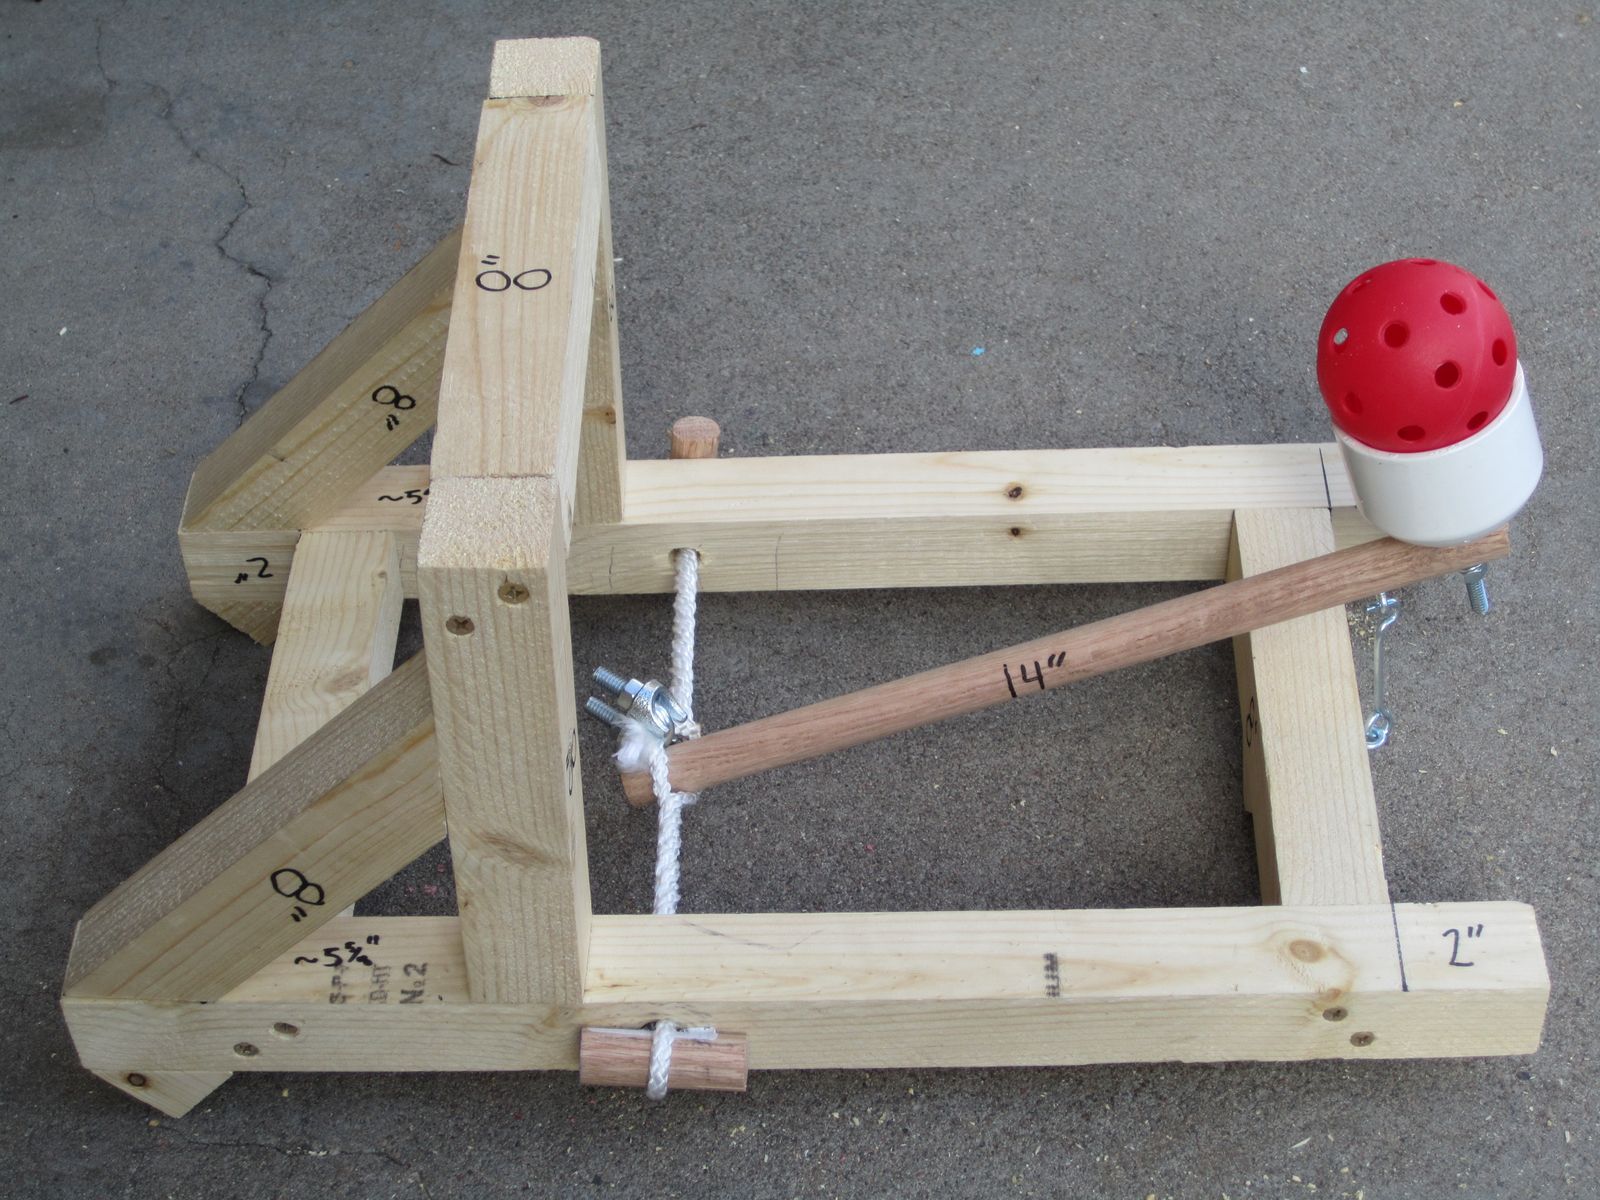 How to Build a Small Catapult for School